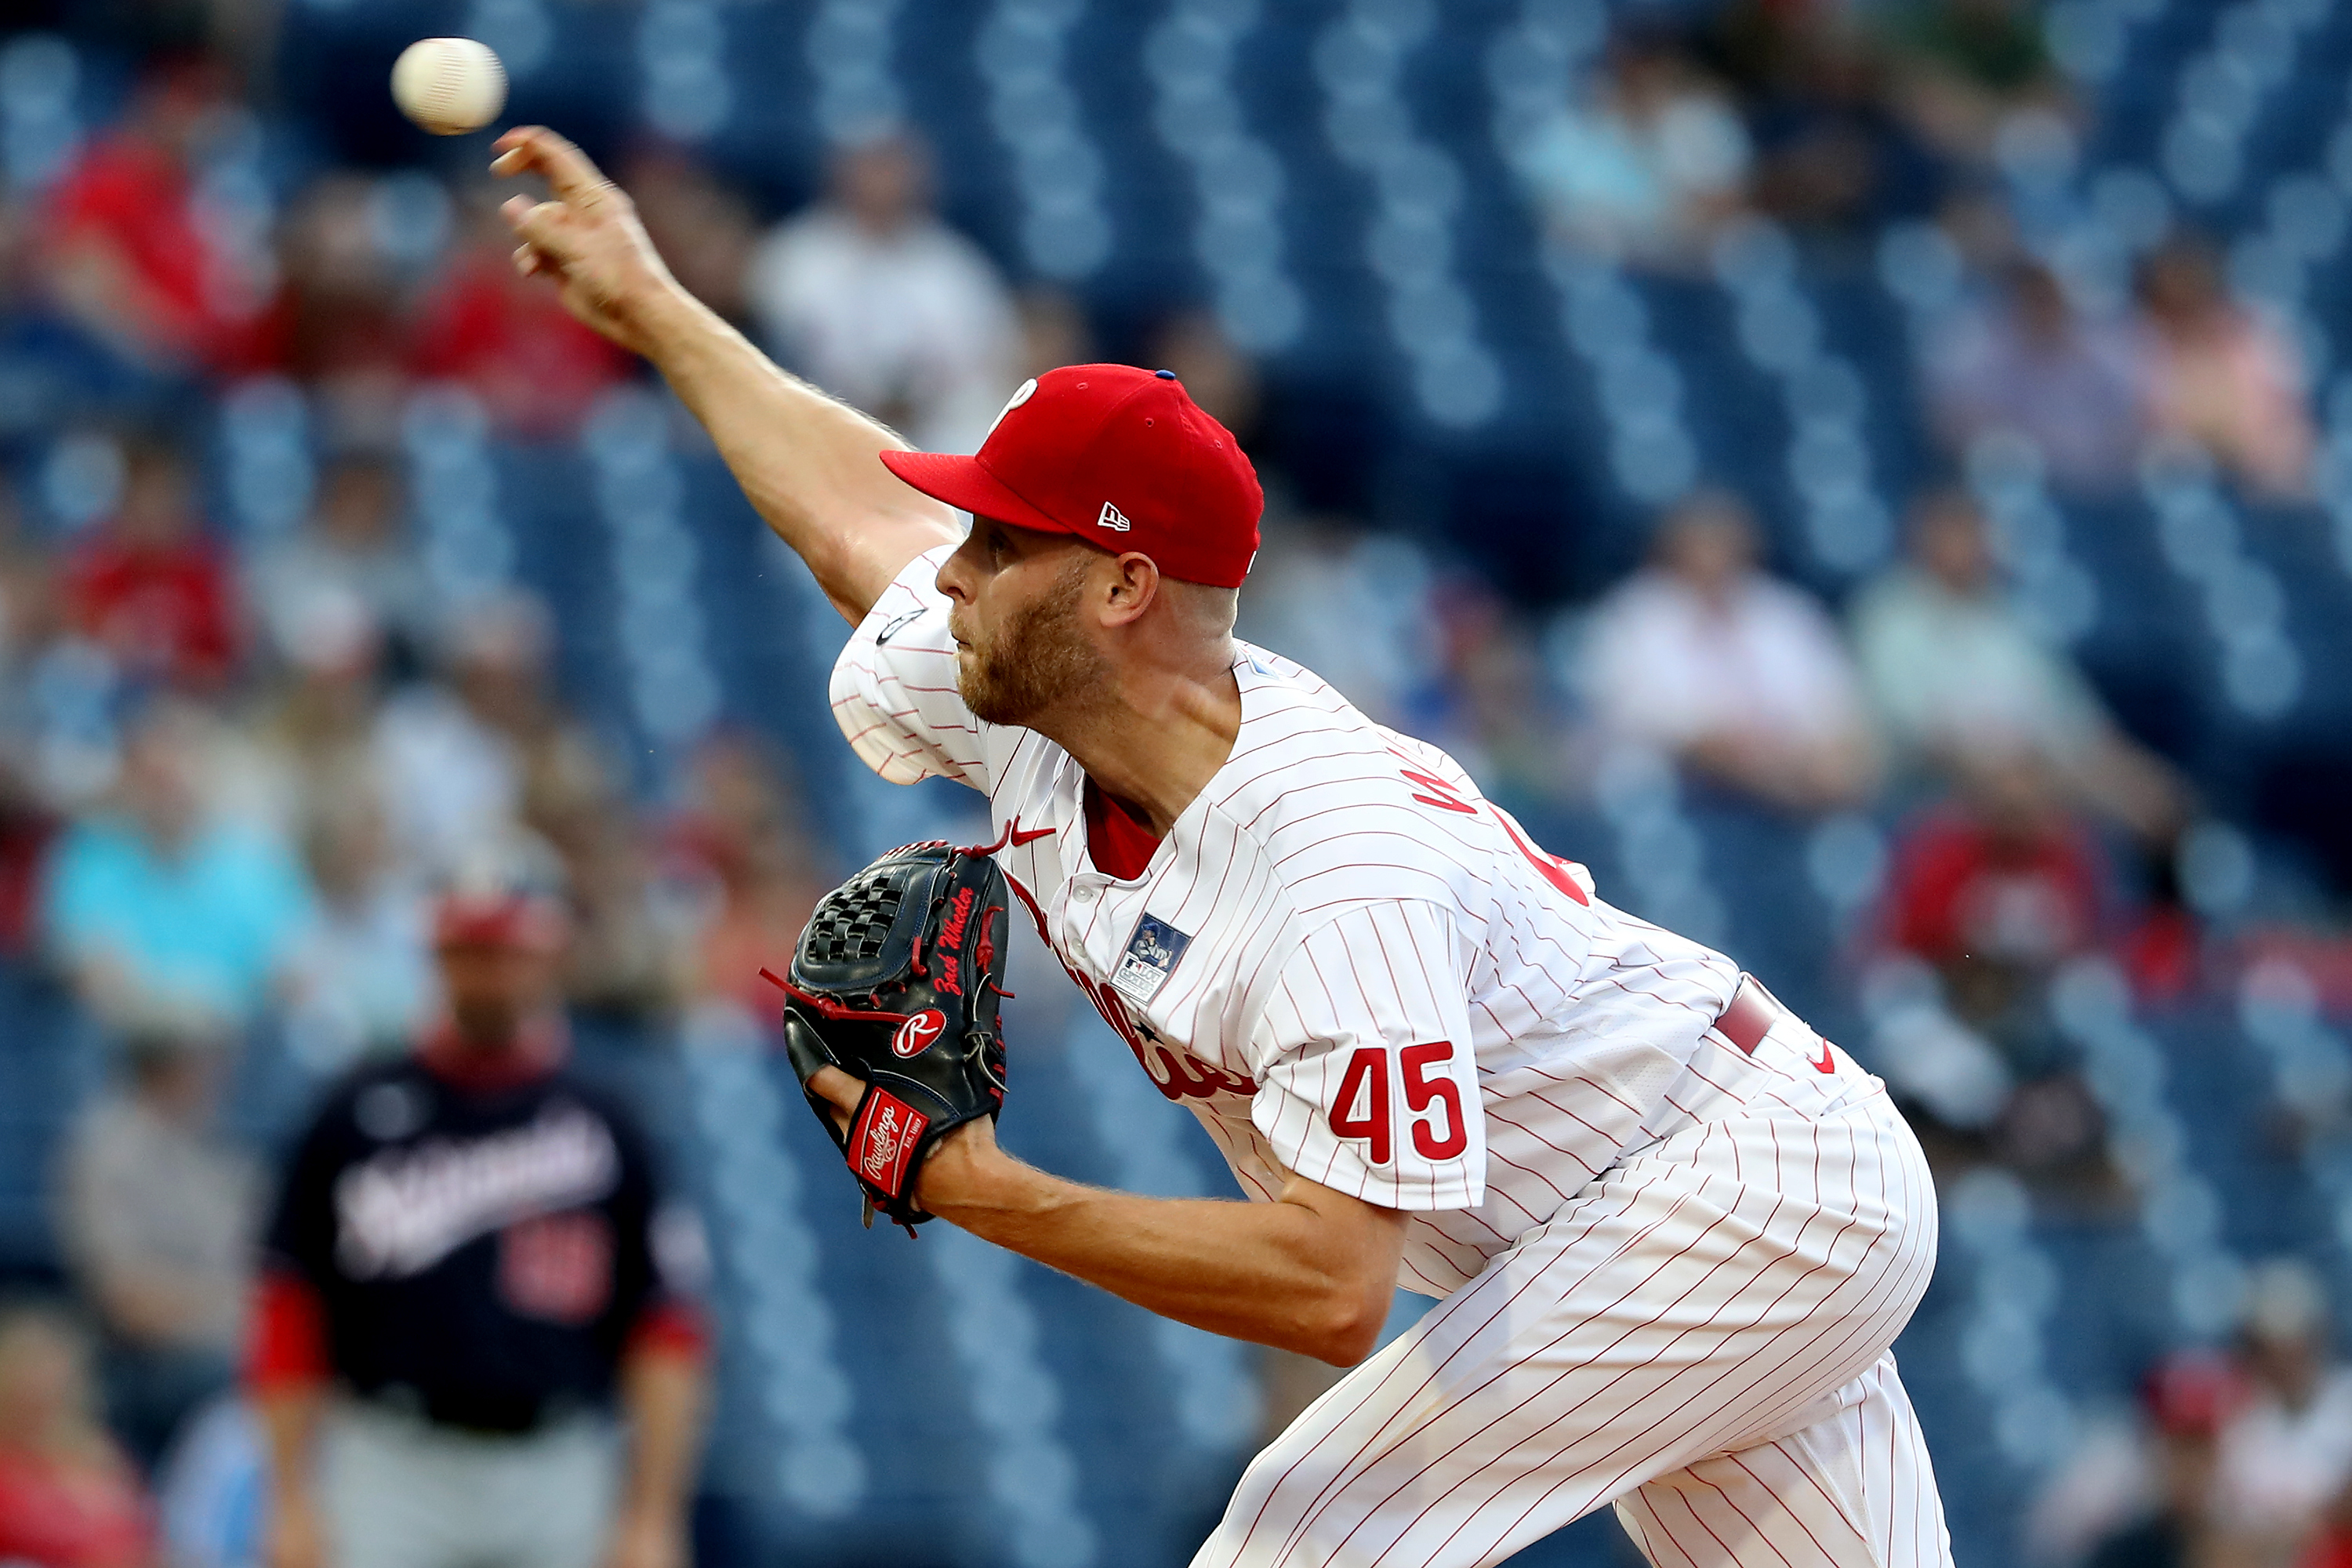 Phillies: Can Travis Jankowski sustain his elite offensive production